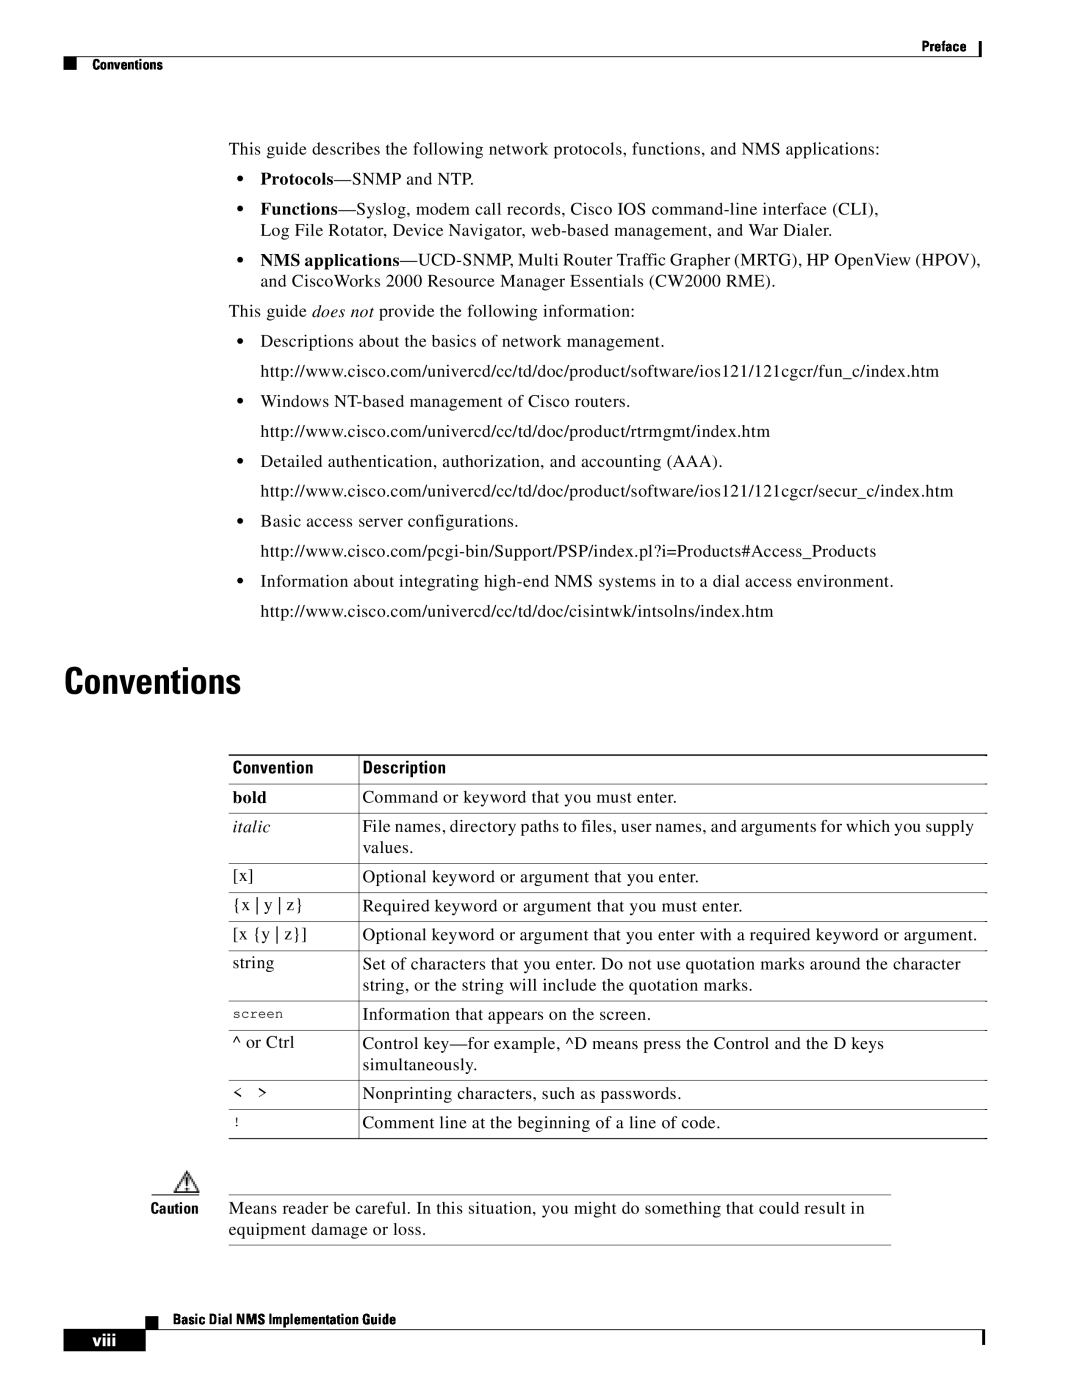 Cisco Systems Dial NMS manual Conventions, bold, Leee 